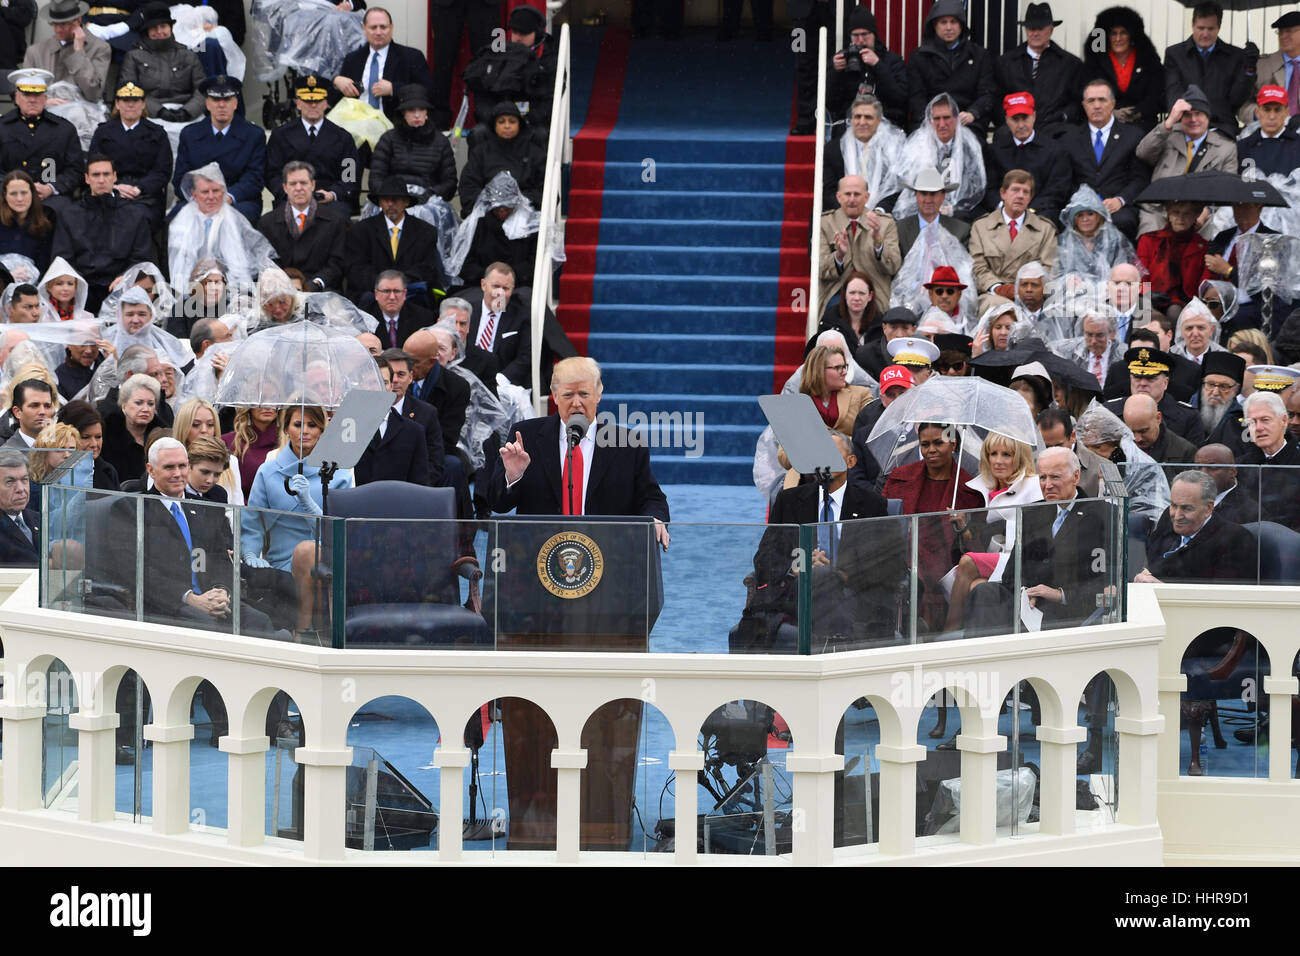 Washington DC, USA. 20th Jan, 2017. President Donald Trump delivers his inaugural address at the inauguration on January 20, 2017 in Washington, DC Trump became the 45th President of the United States. Credit: MediaPunch Inc/Alamy Live News Stock Photo